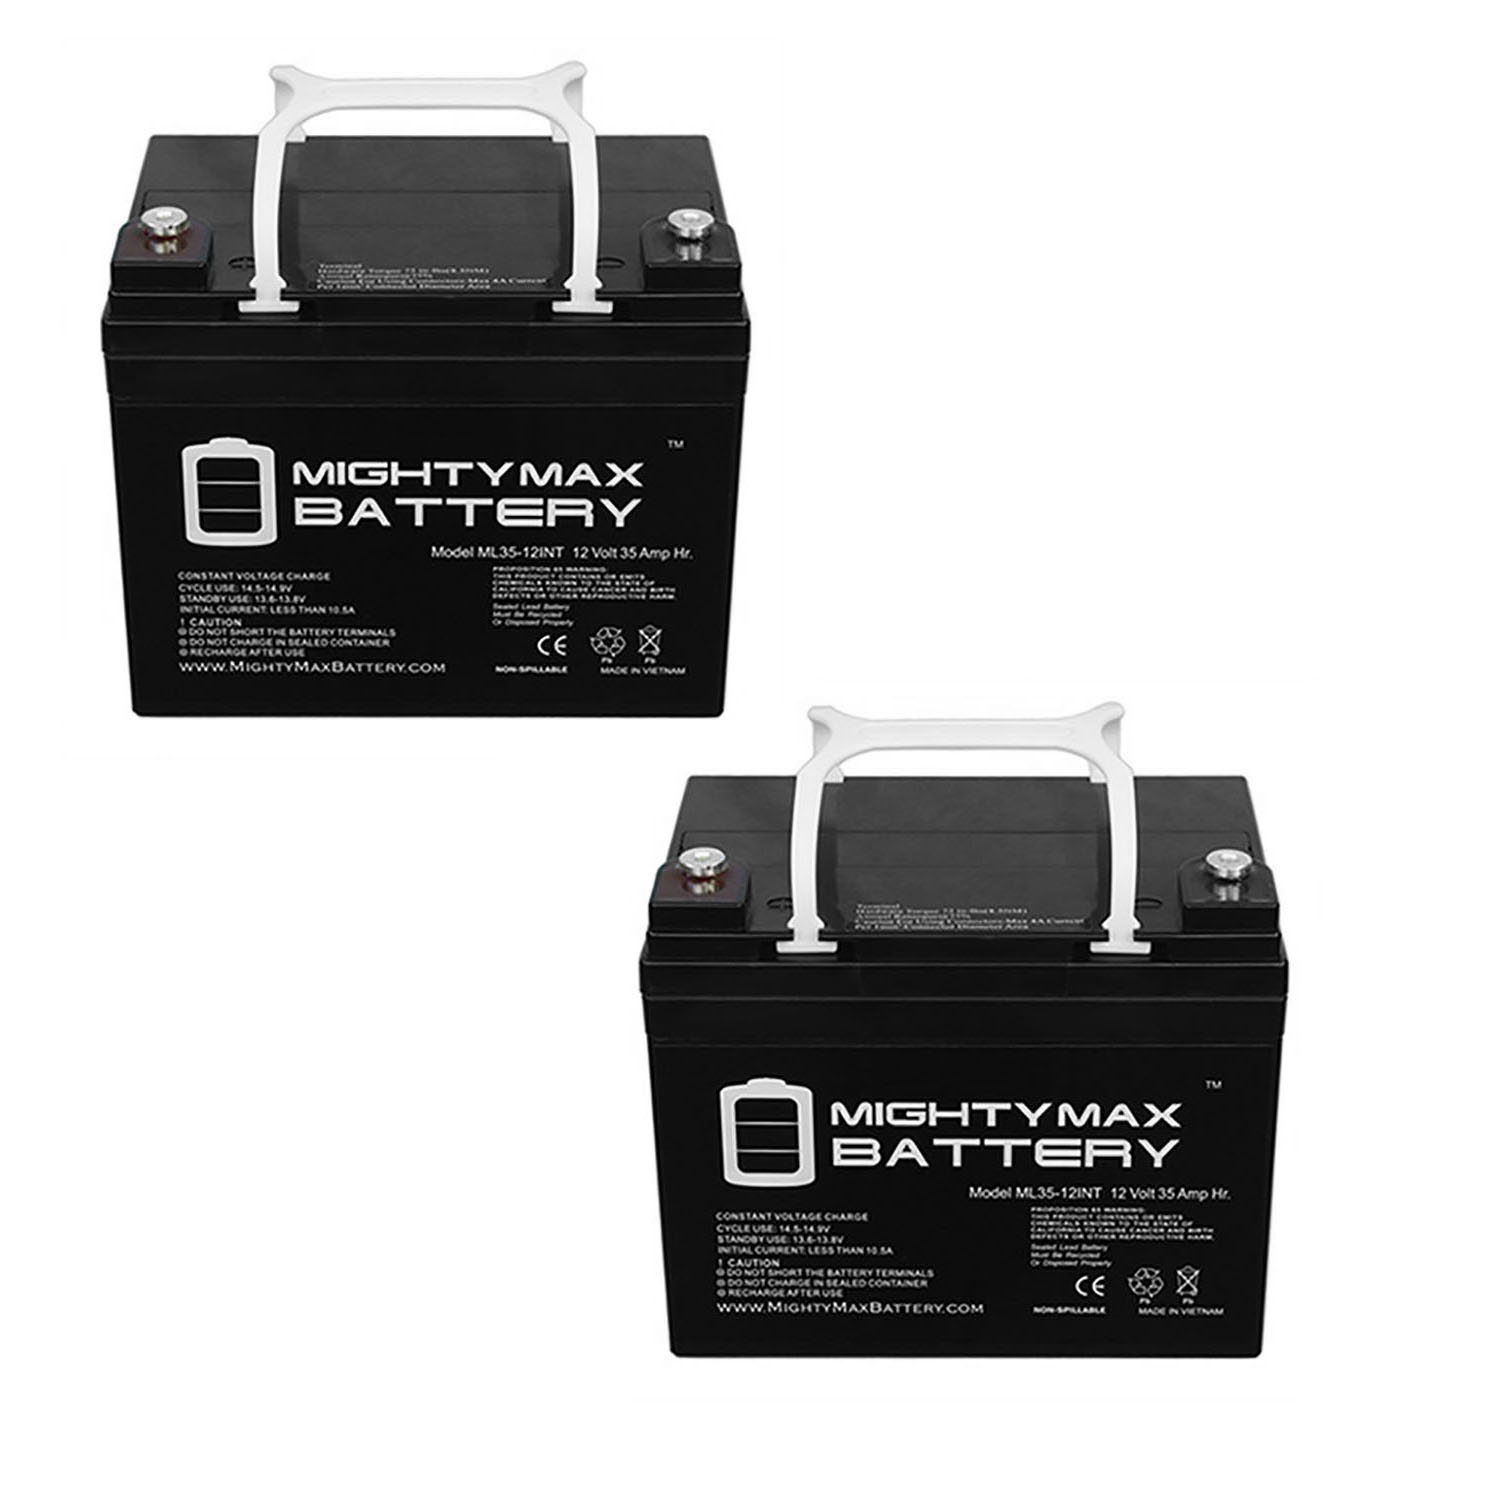 12V 35AH INT Replacement Battery for Ihc Cub Garden 109 - 2 Pack